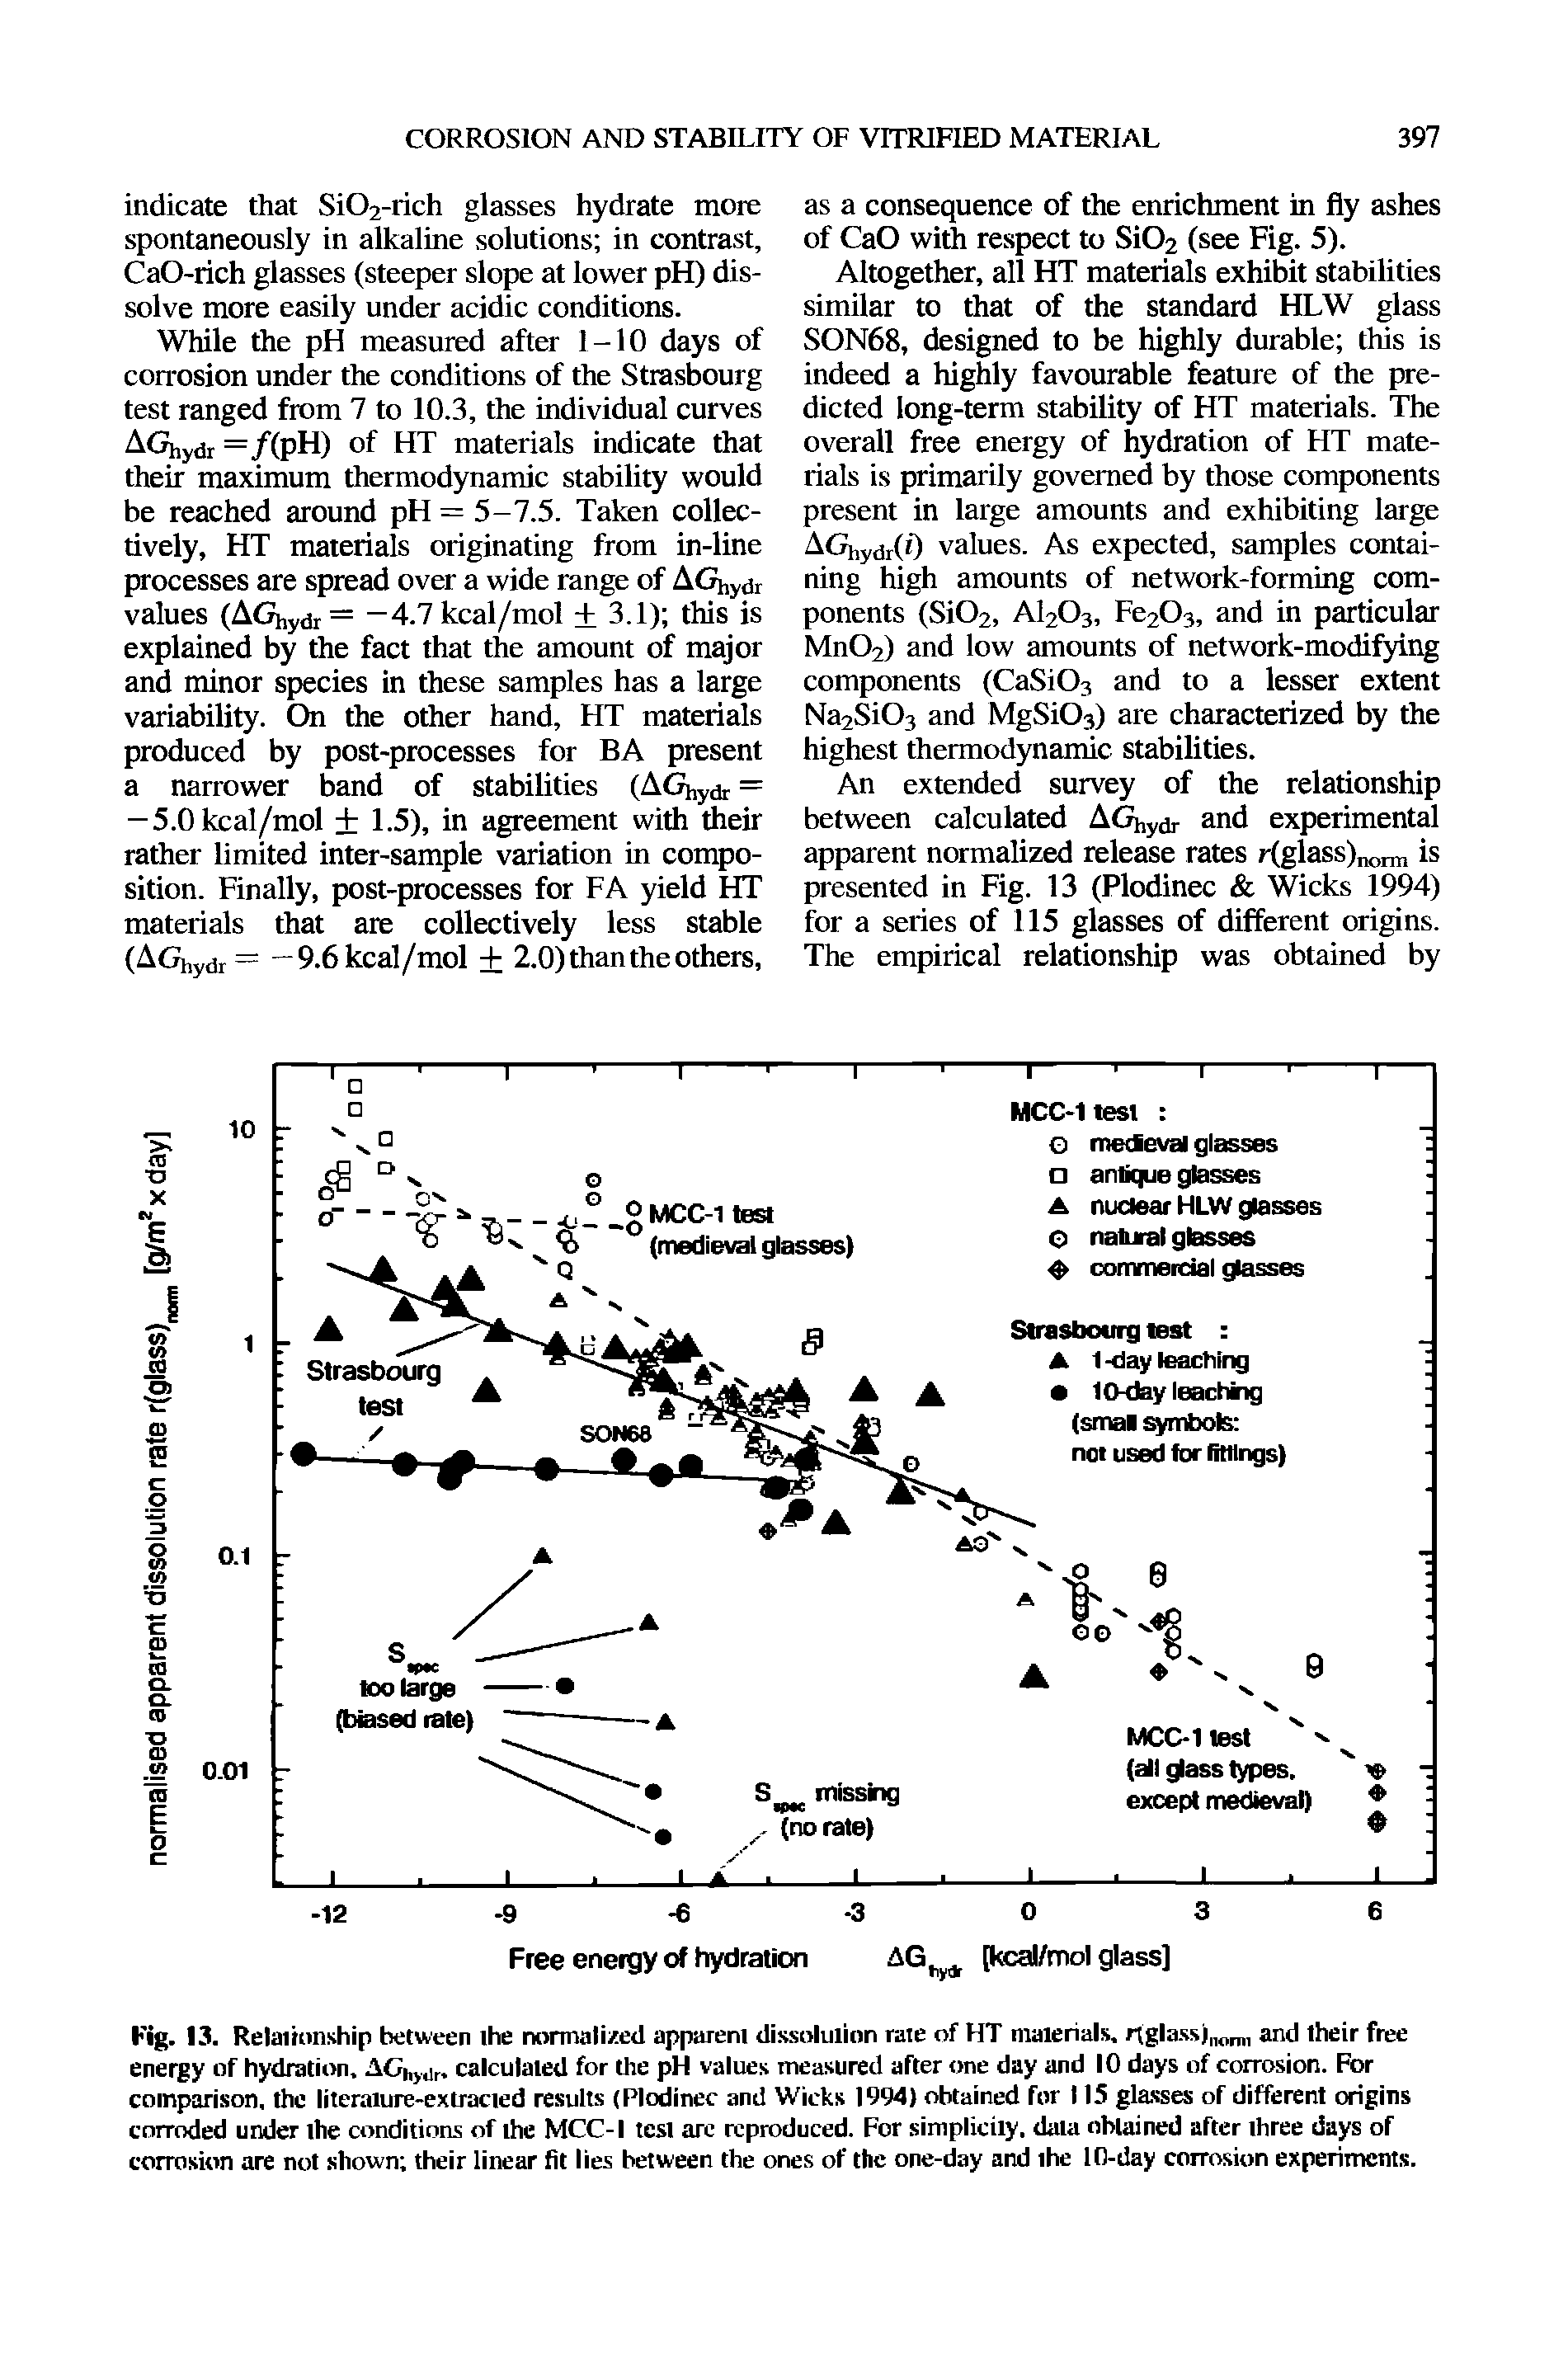 Fig. 13. Relationship between the normalized apparent dissolution rate of HT materials, r(glaxs)l1(lnn and their free energy of hydration, ACh>lir. calculated for the pH values measured after one day and 10 days of corrosion. For comparison, the literature-extracted results (Plodinec and Wicks 1994) obtained for 115 glasses of different origins corroded under the conditions of the MCC-I test are reproduced. For simplicity, data obtained after three days of corrosion are not shown their linear fit lies between the ones of the one-day and the 10-day corrosion experiments.